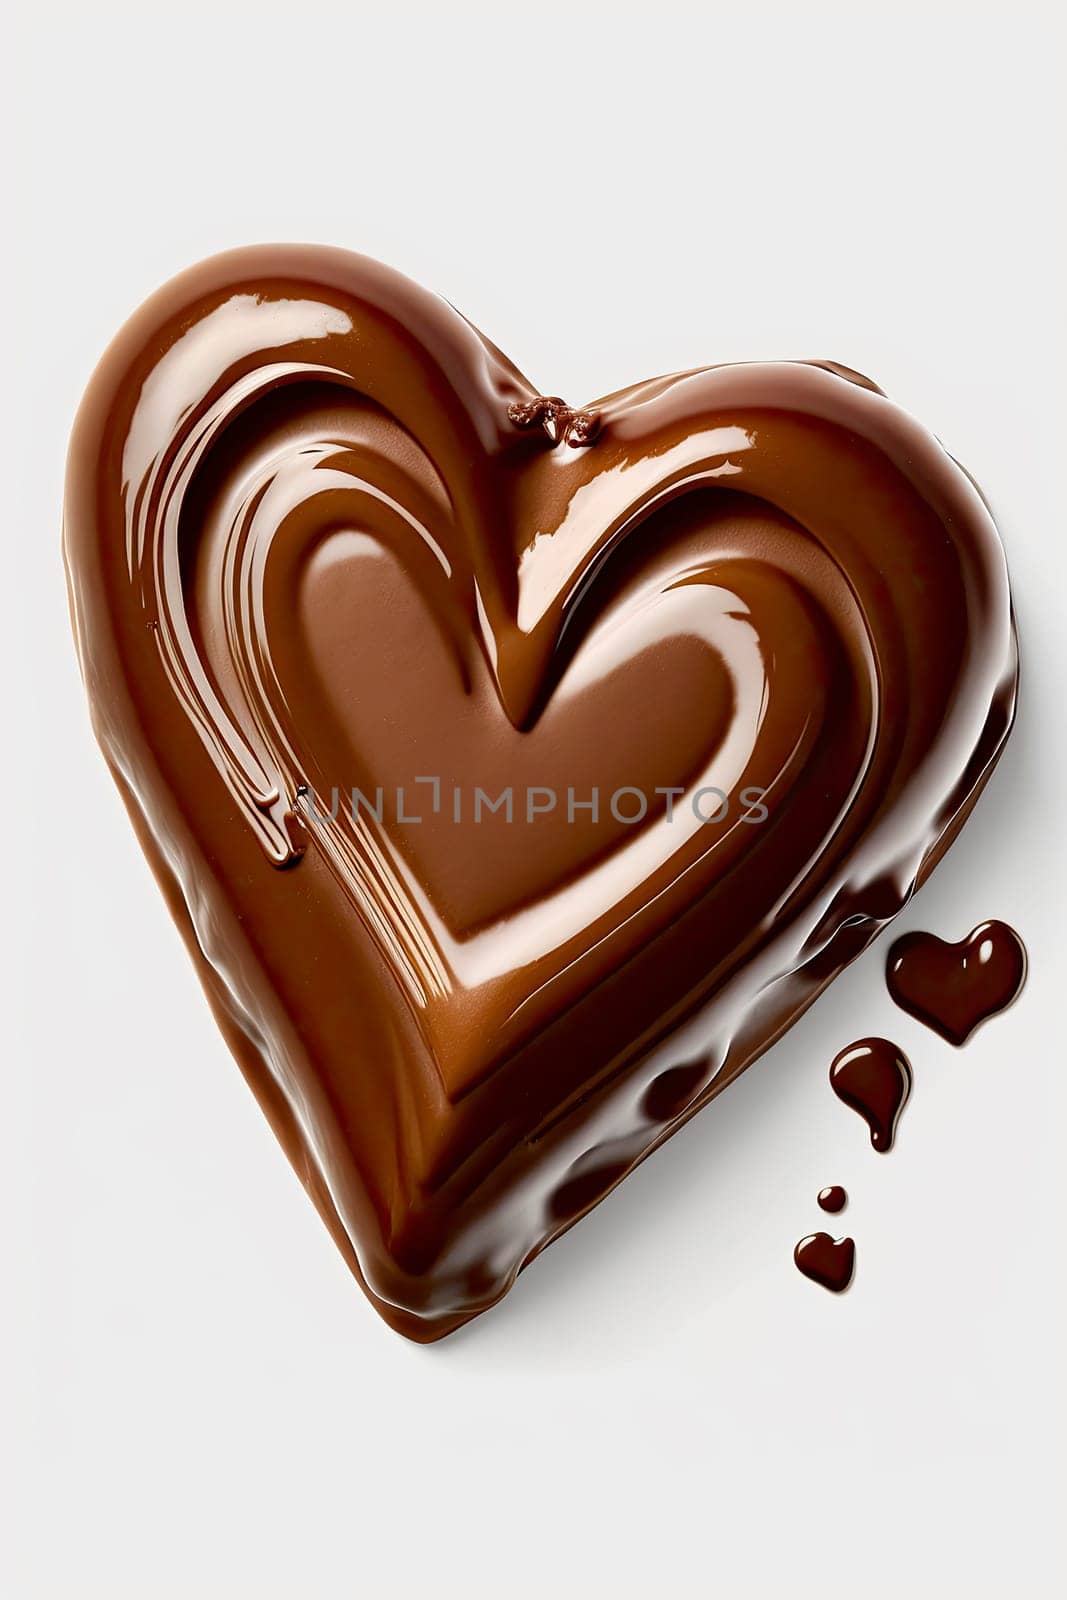 Heart shaped chocolate candies isolate on white background. by yanadjana